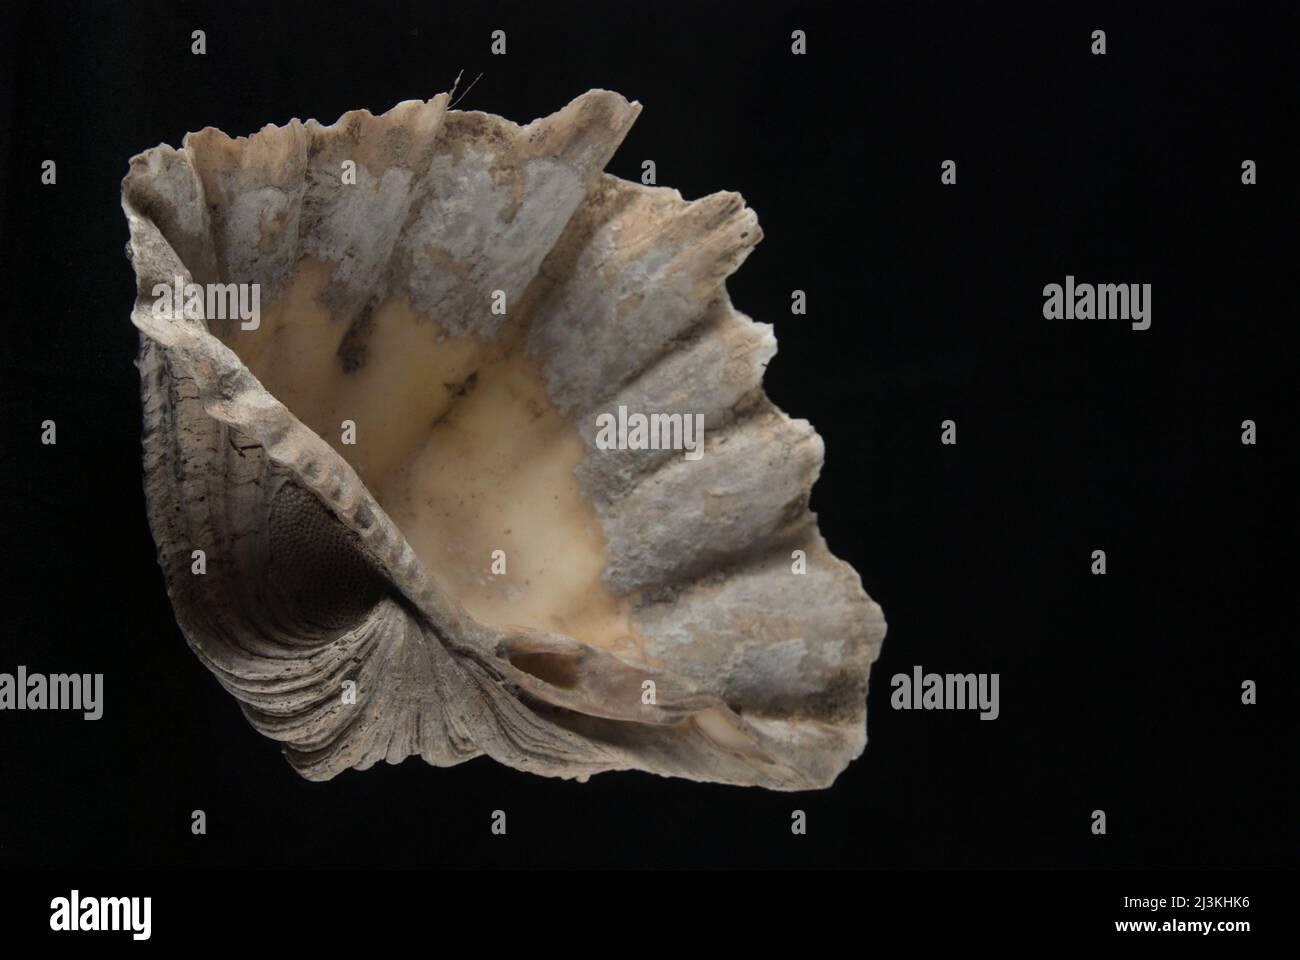 Giant seashell that was discovered at a prehistoric burial site in Batujaya, Karawang, West Java, Indonesia. Stock Photo